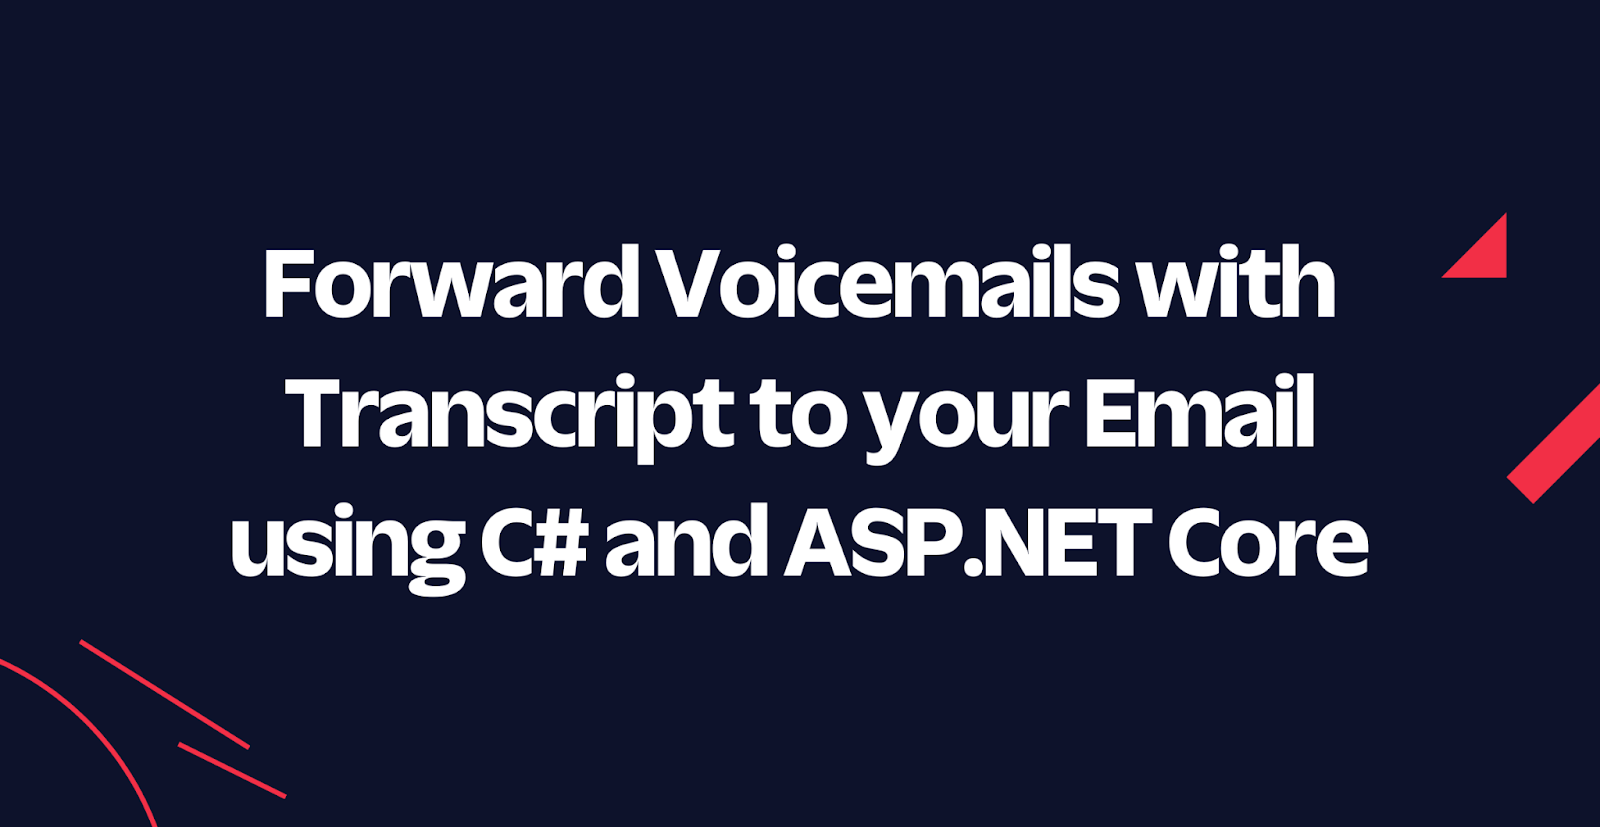 Forward Voicemails with Transcript to your Email using C# and ASP.NET Core